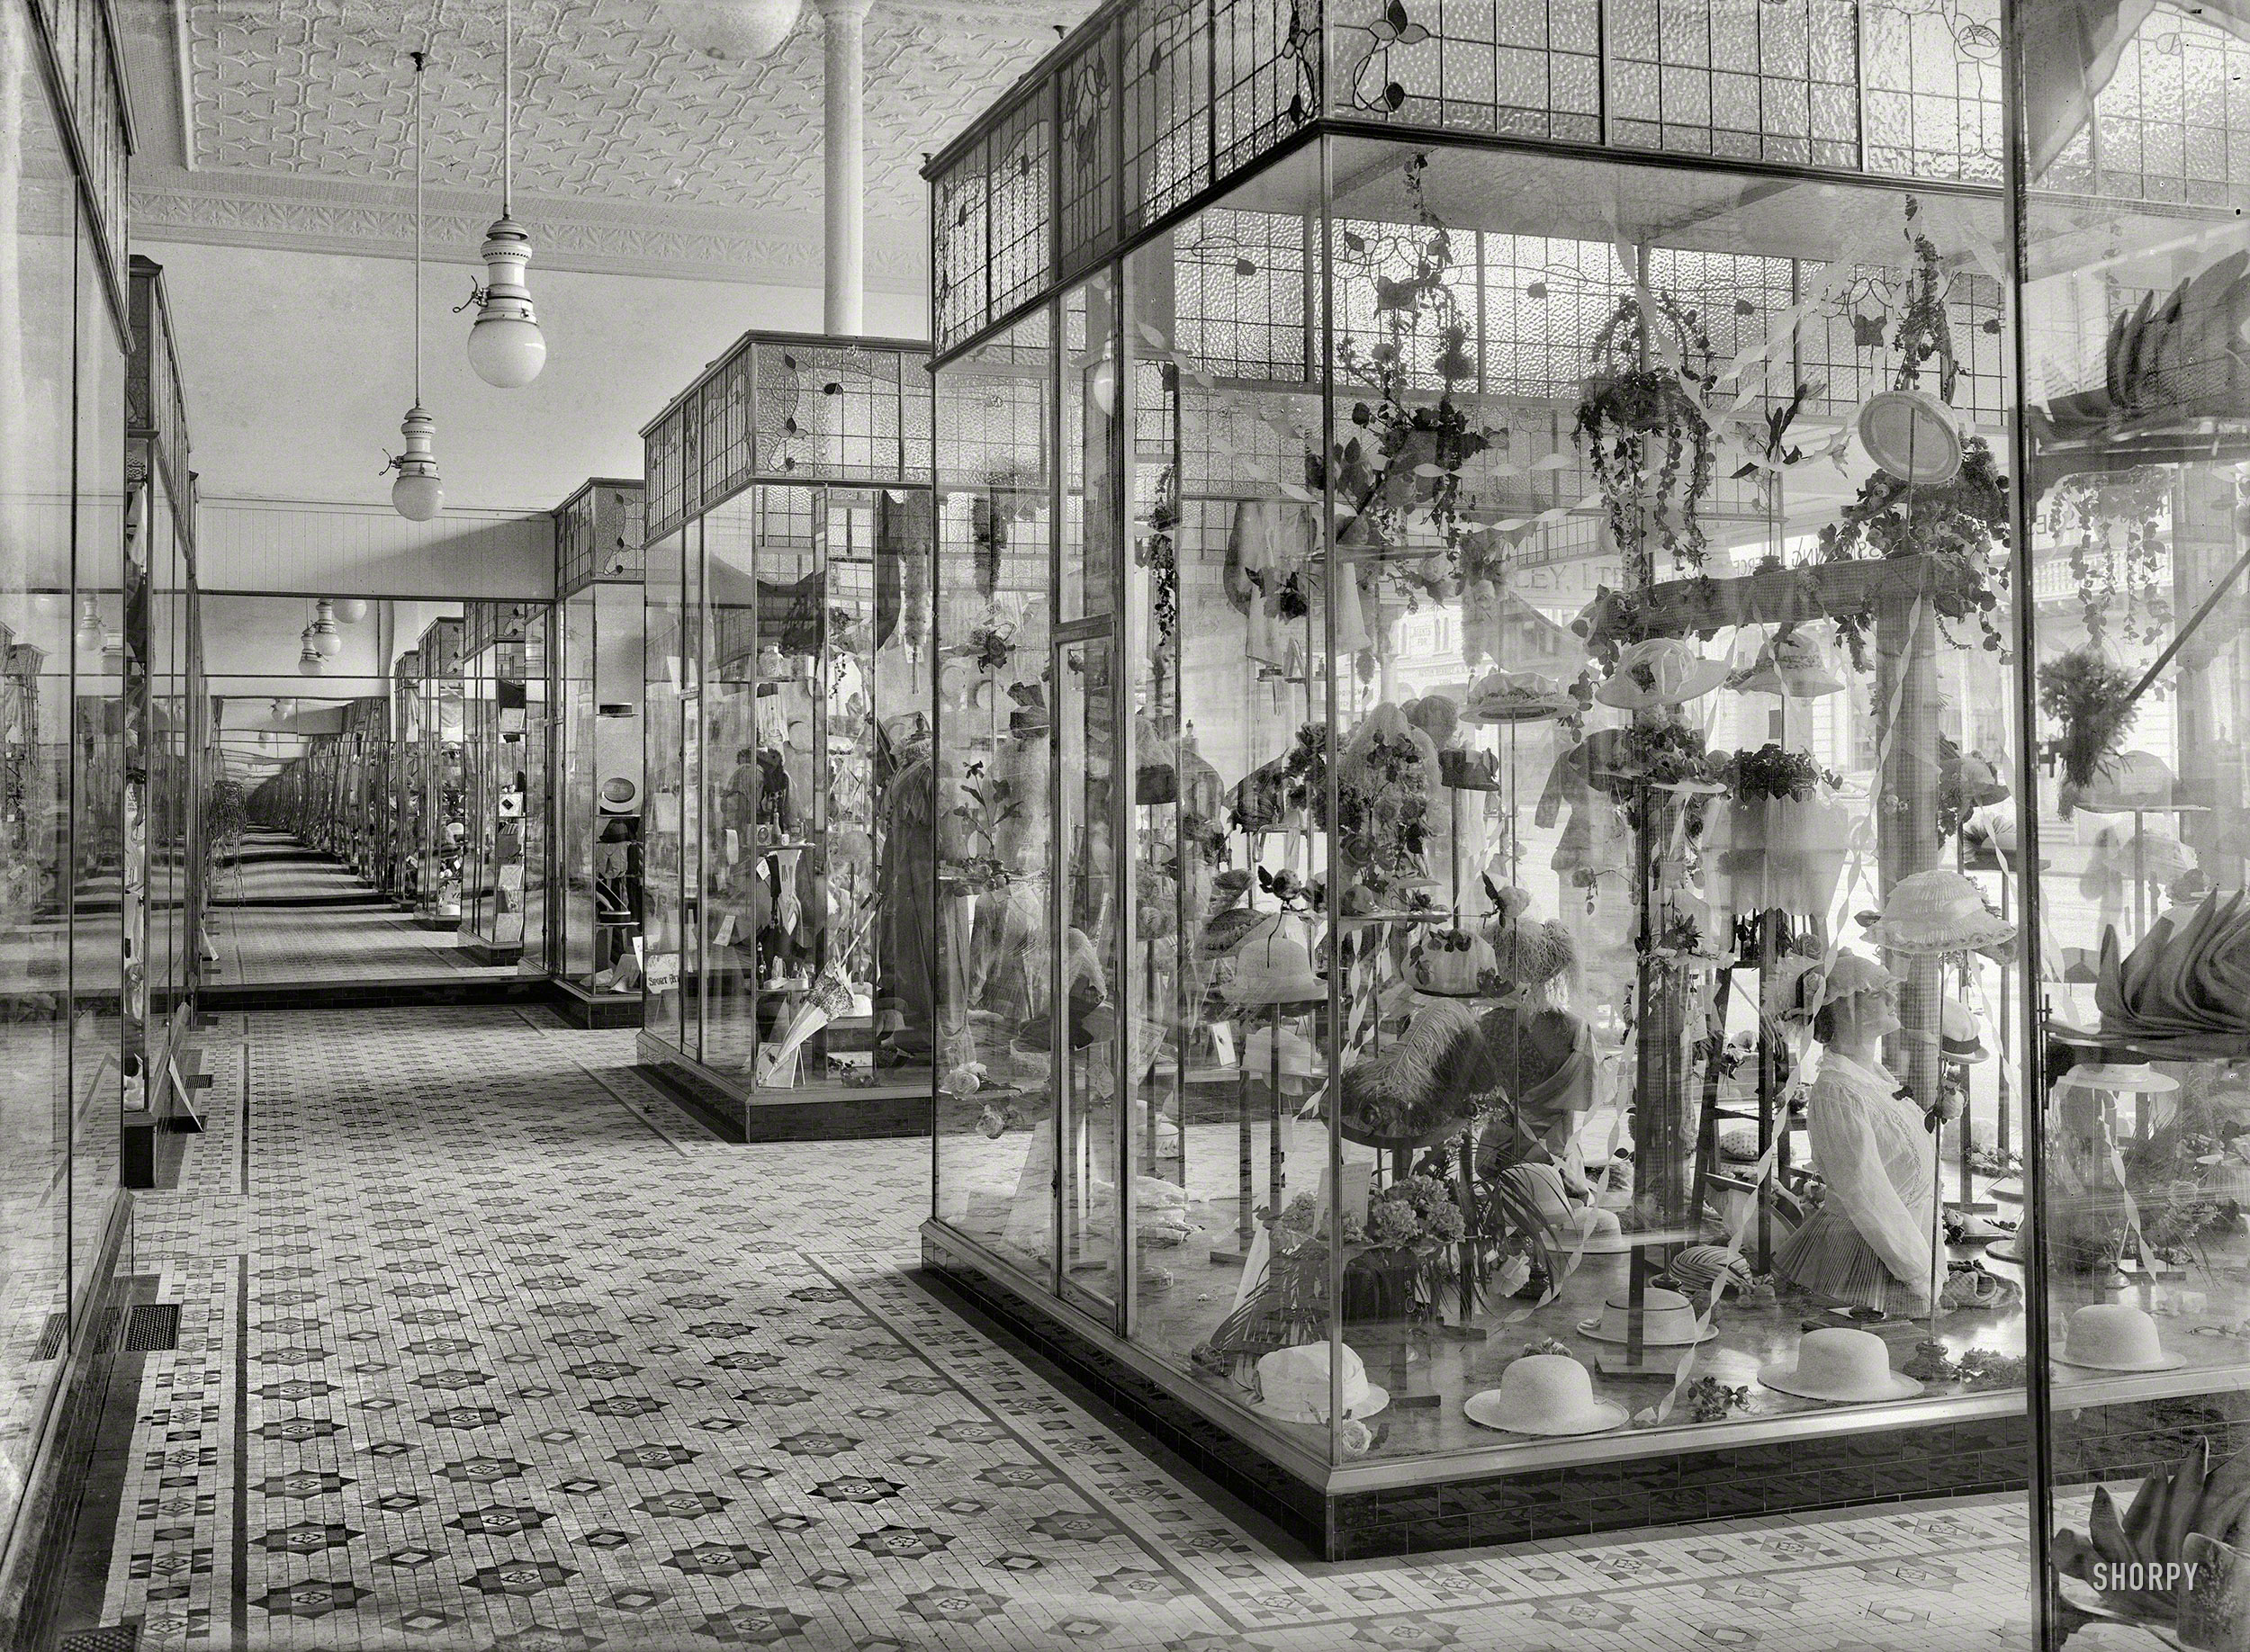 New Zealand, 1915. "Display cases in the Economic drapery store, Wanganui." Tesla Studios glass negative by Frank J. Denton. View full size.